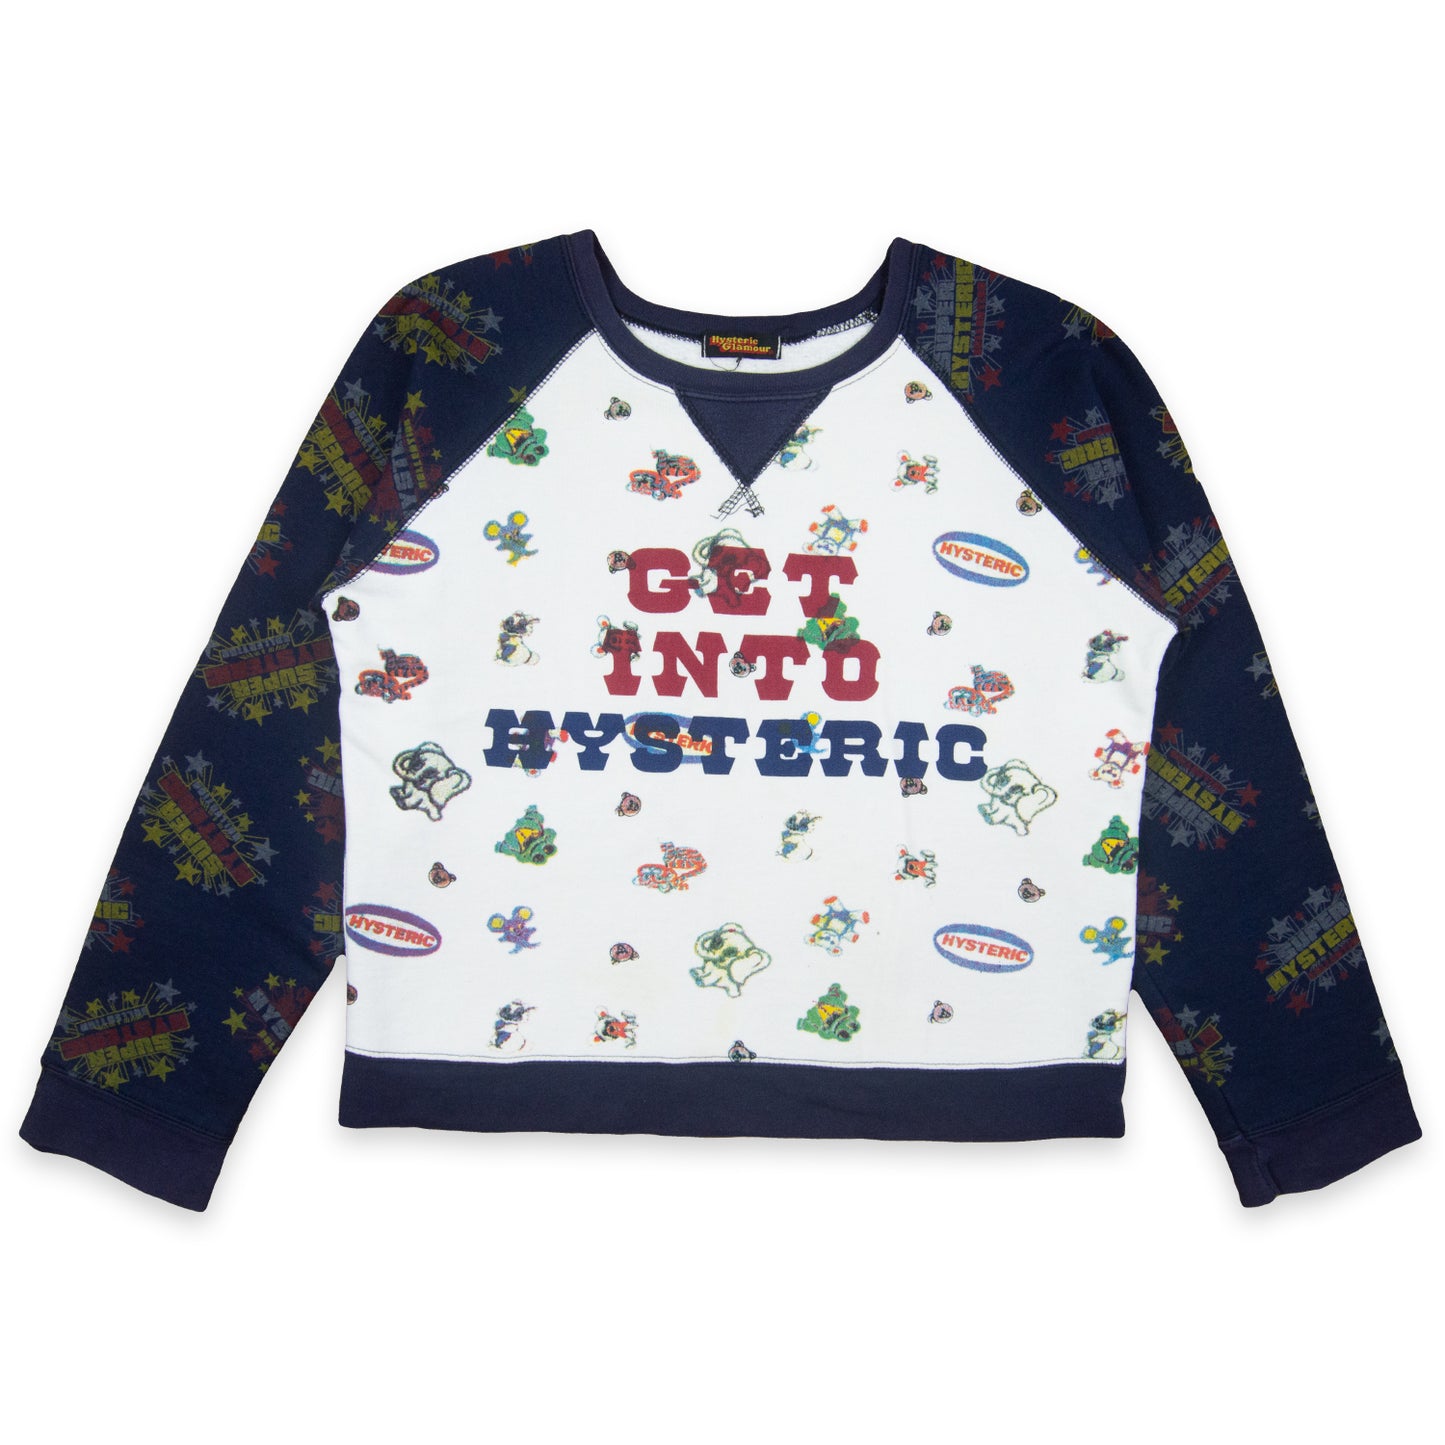 Hysteric Glamour Get Into Hysteric All Over Print Crewneck